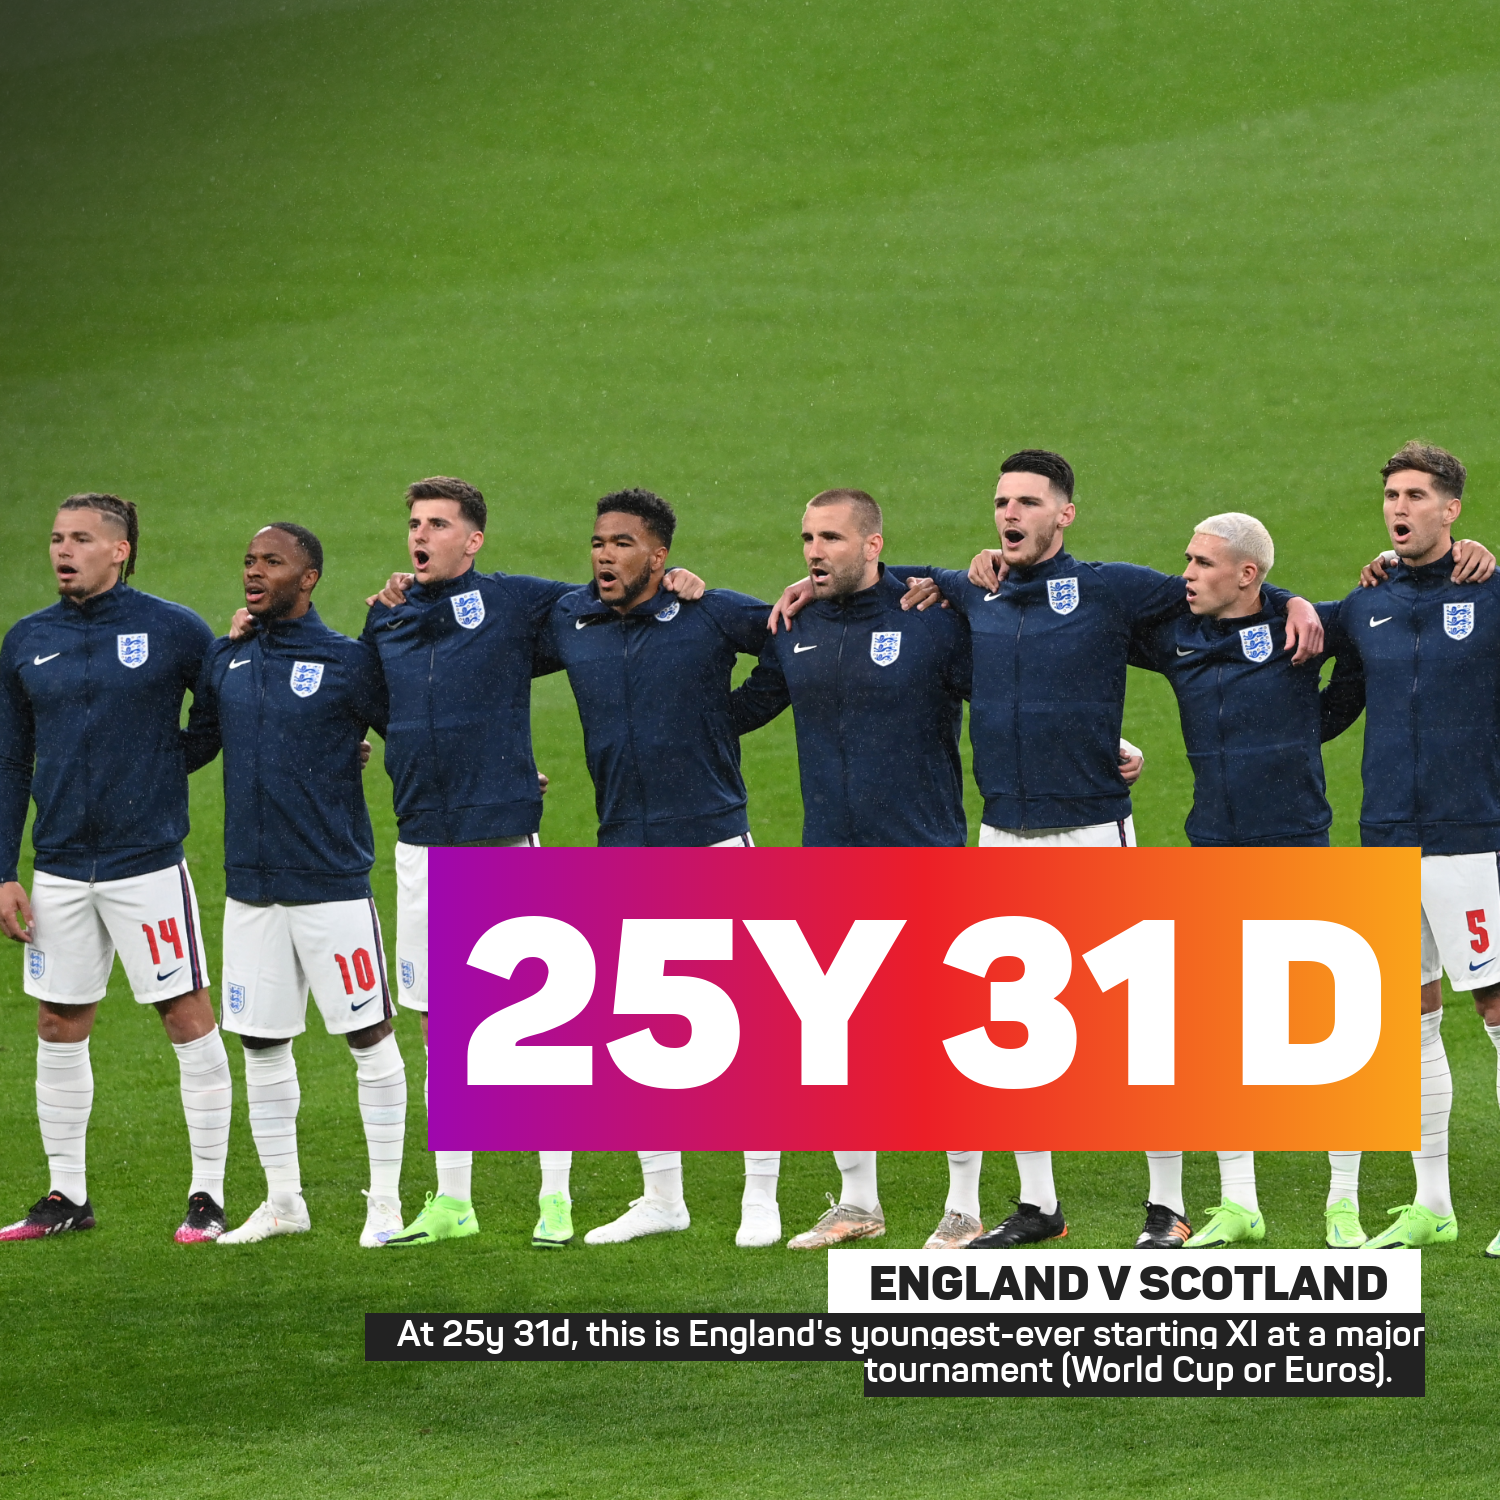 At 25y 31d, this is England's youngest-ever starting XI at a major tournament (WC or EURO).